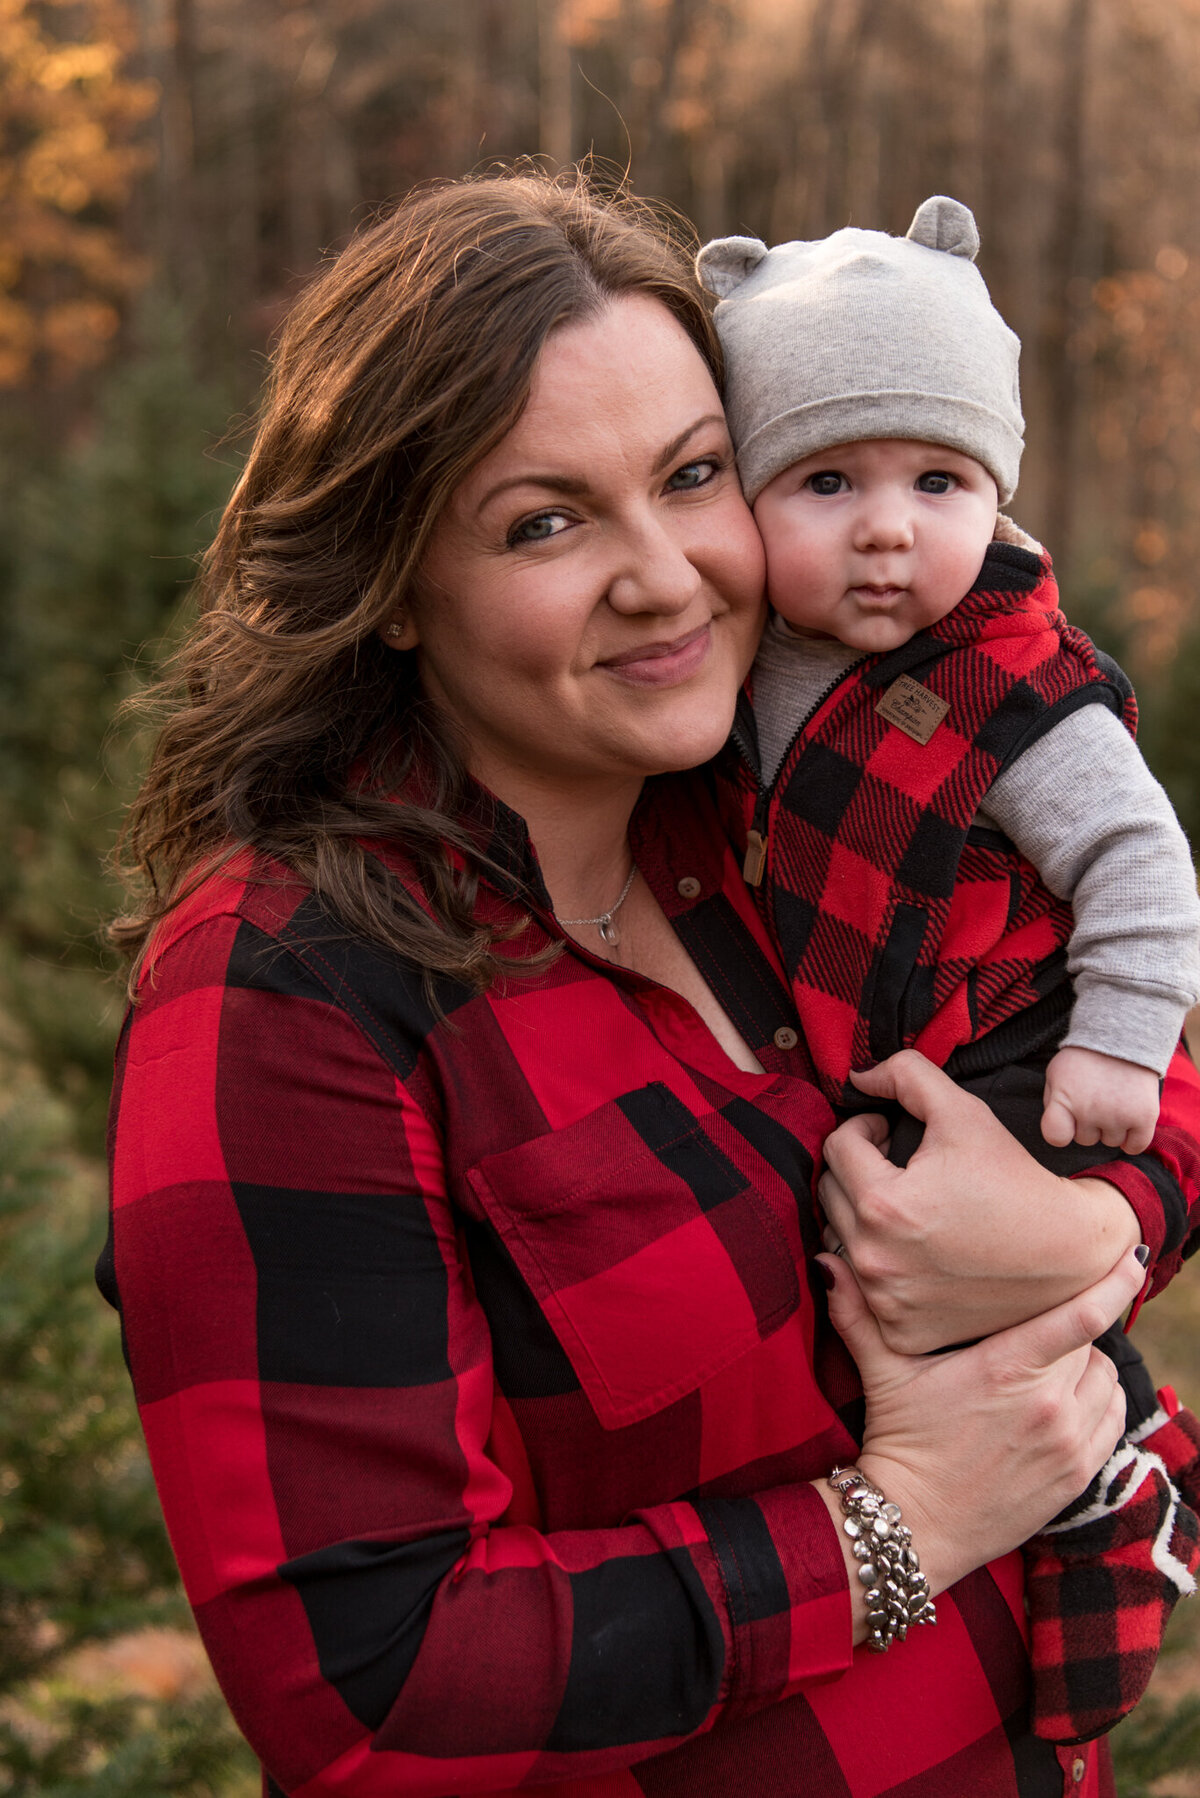 Mother in red buffalo plaid shirt holding infant son and smiling